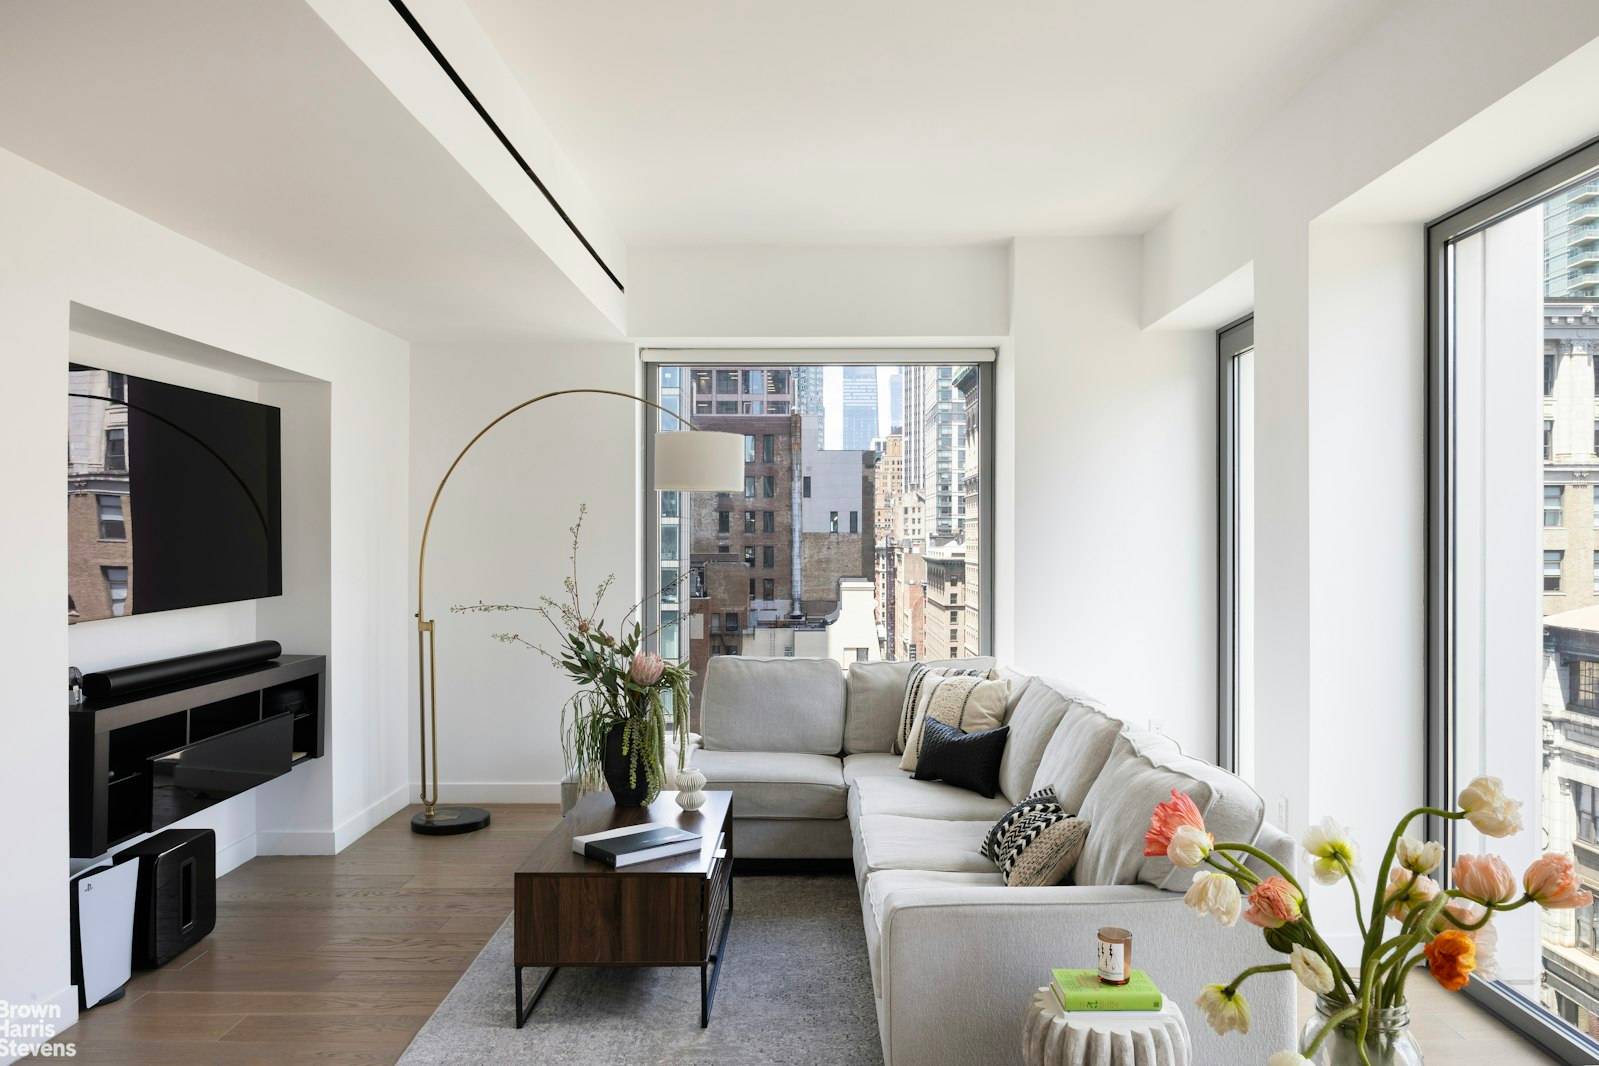 Welcome to 30 East 31, a stunning Neo Gothic gem situated in the historic and trendy NoMad neighborhood.